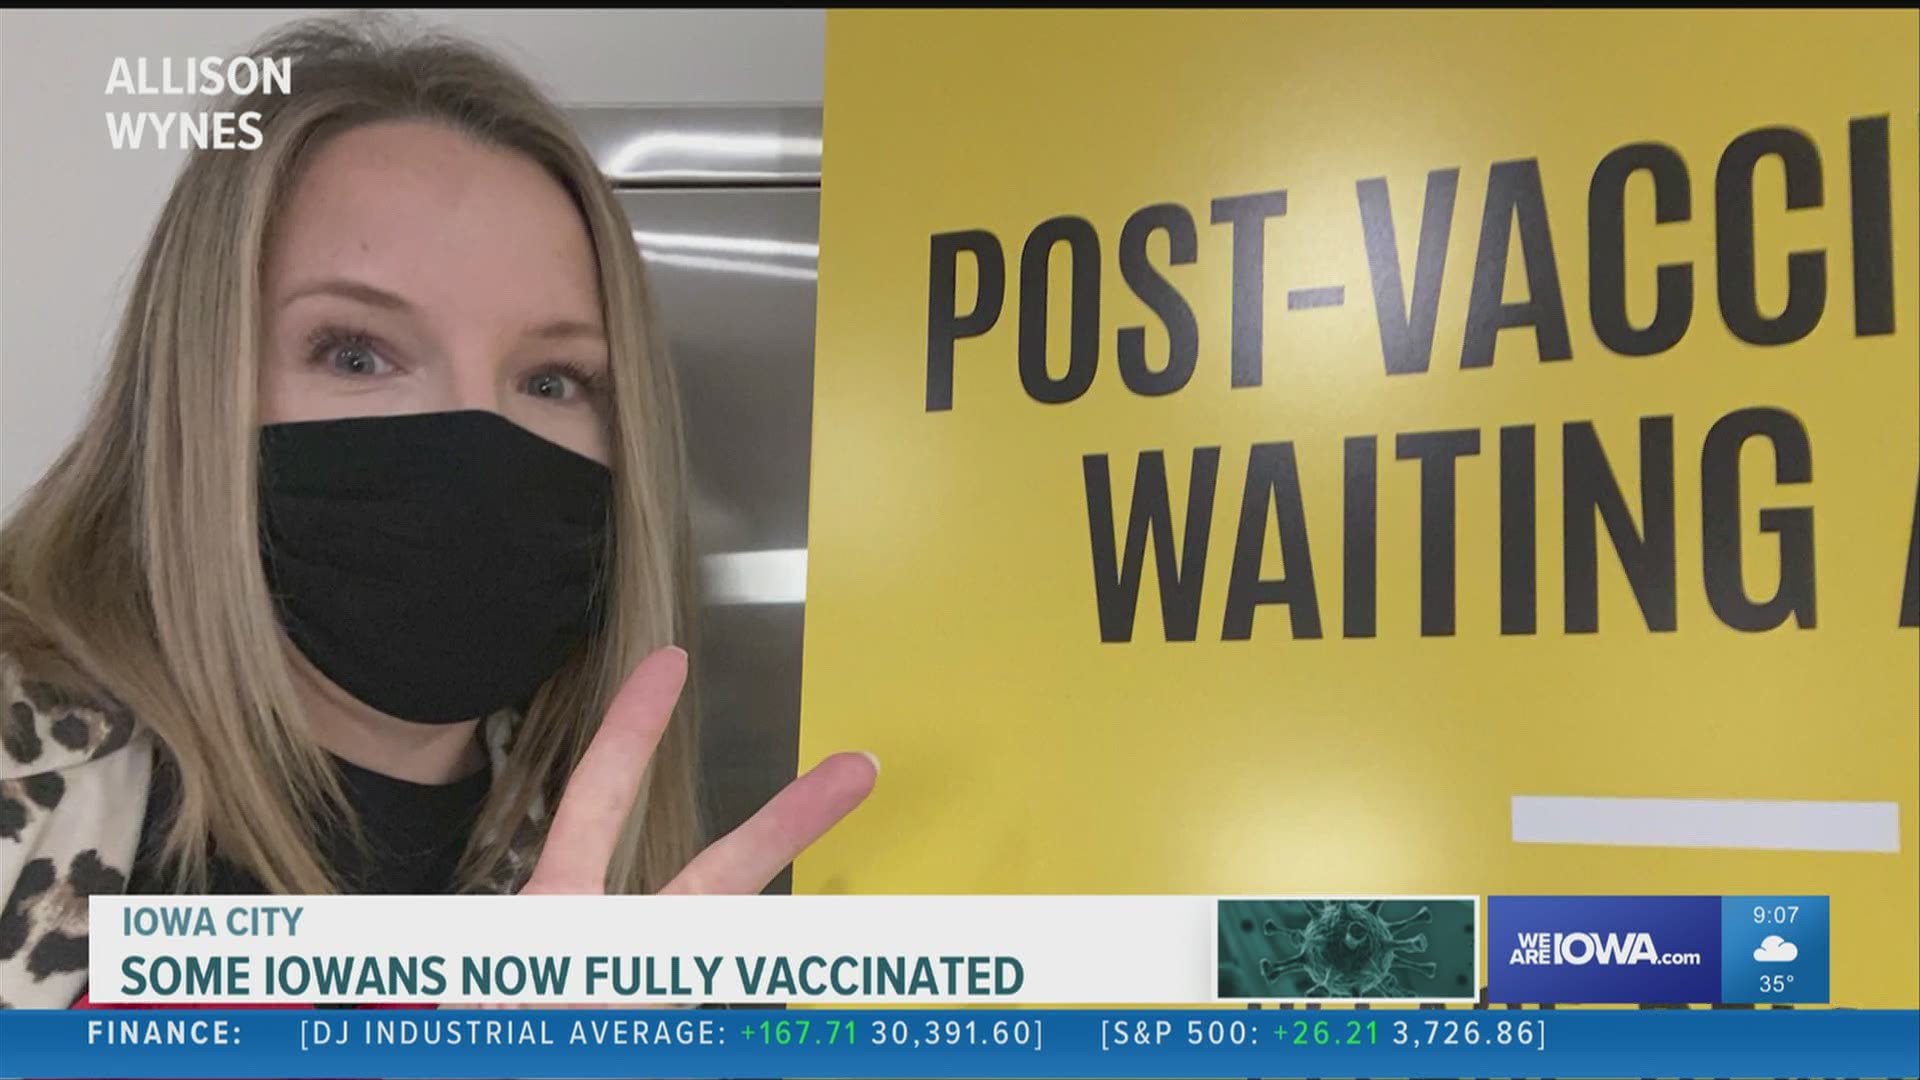 Allison Wynes, a nurse practitioner at University of Iowa Health Care, still plans to take steps to slow the spread of COVID-19, despite now being fully vaccinated.